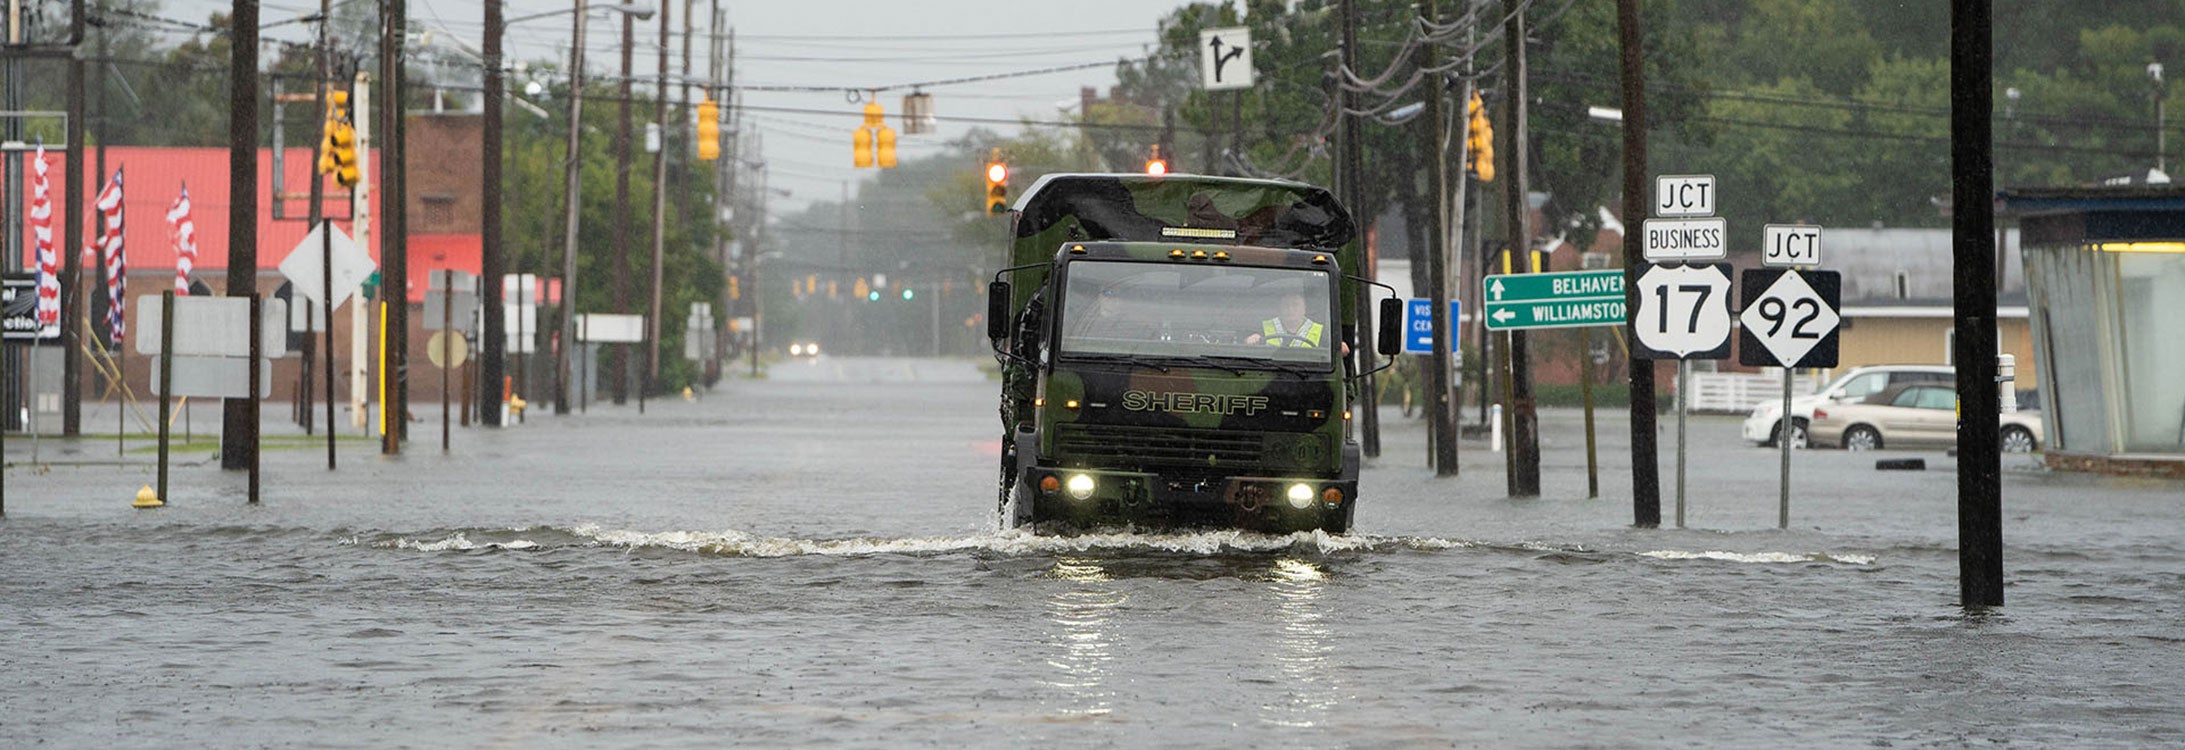 ECU will work with communities in eastern North Carolina to help them become
more resilient as they face sea level rise, extreme weather and other risks.